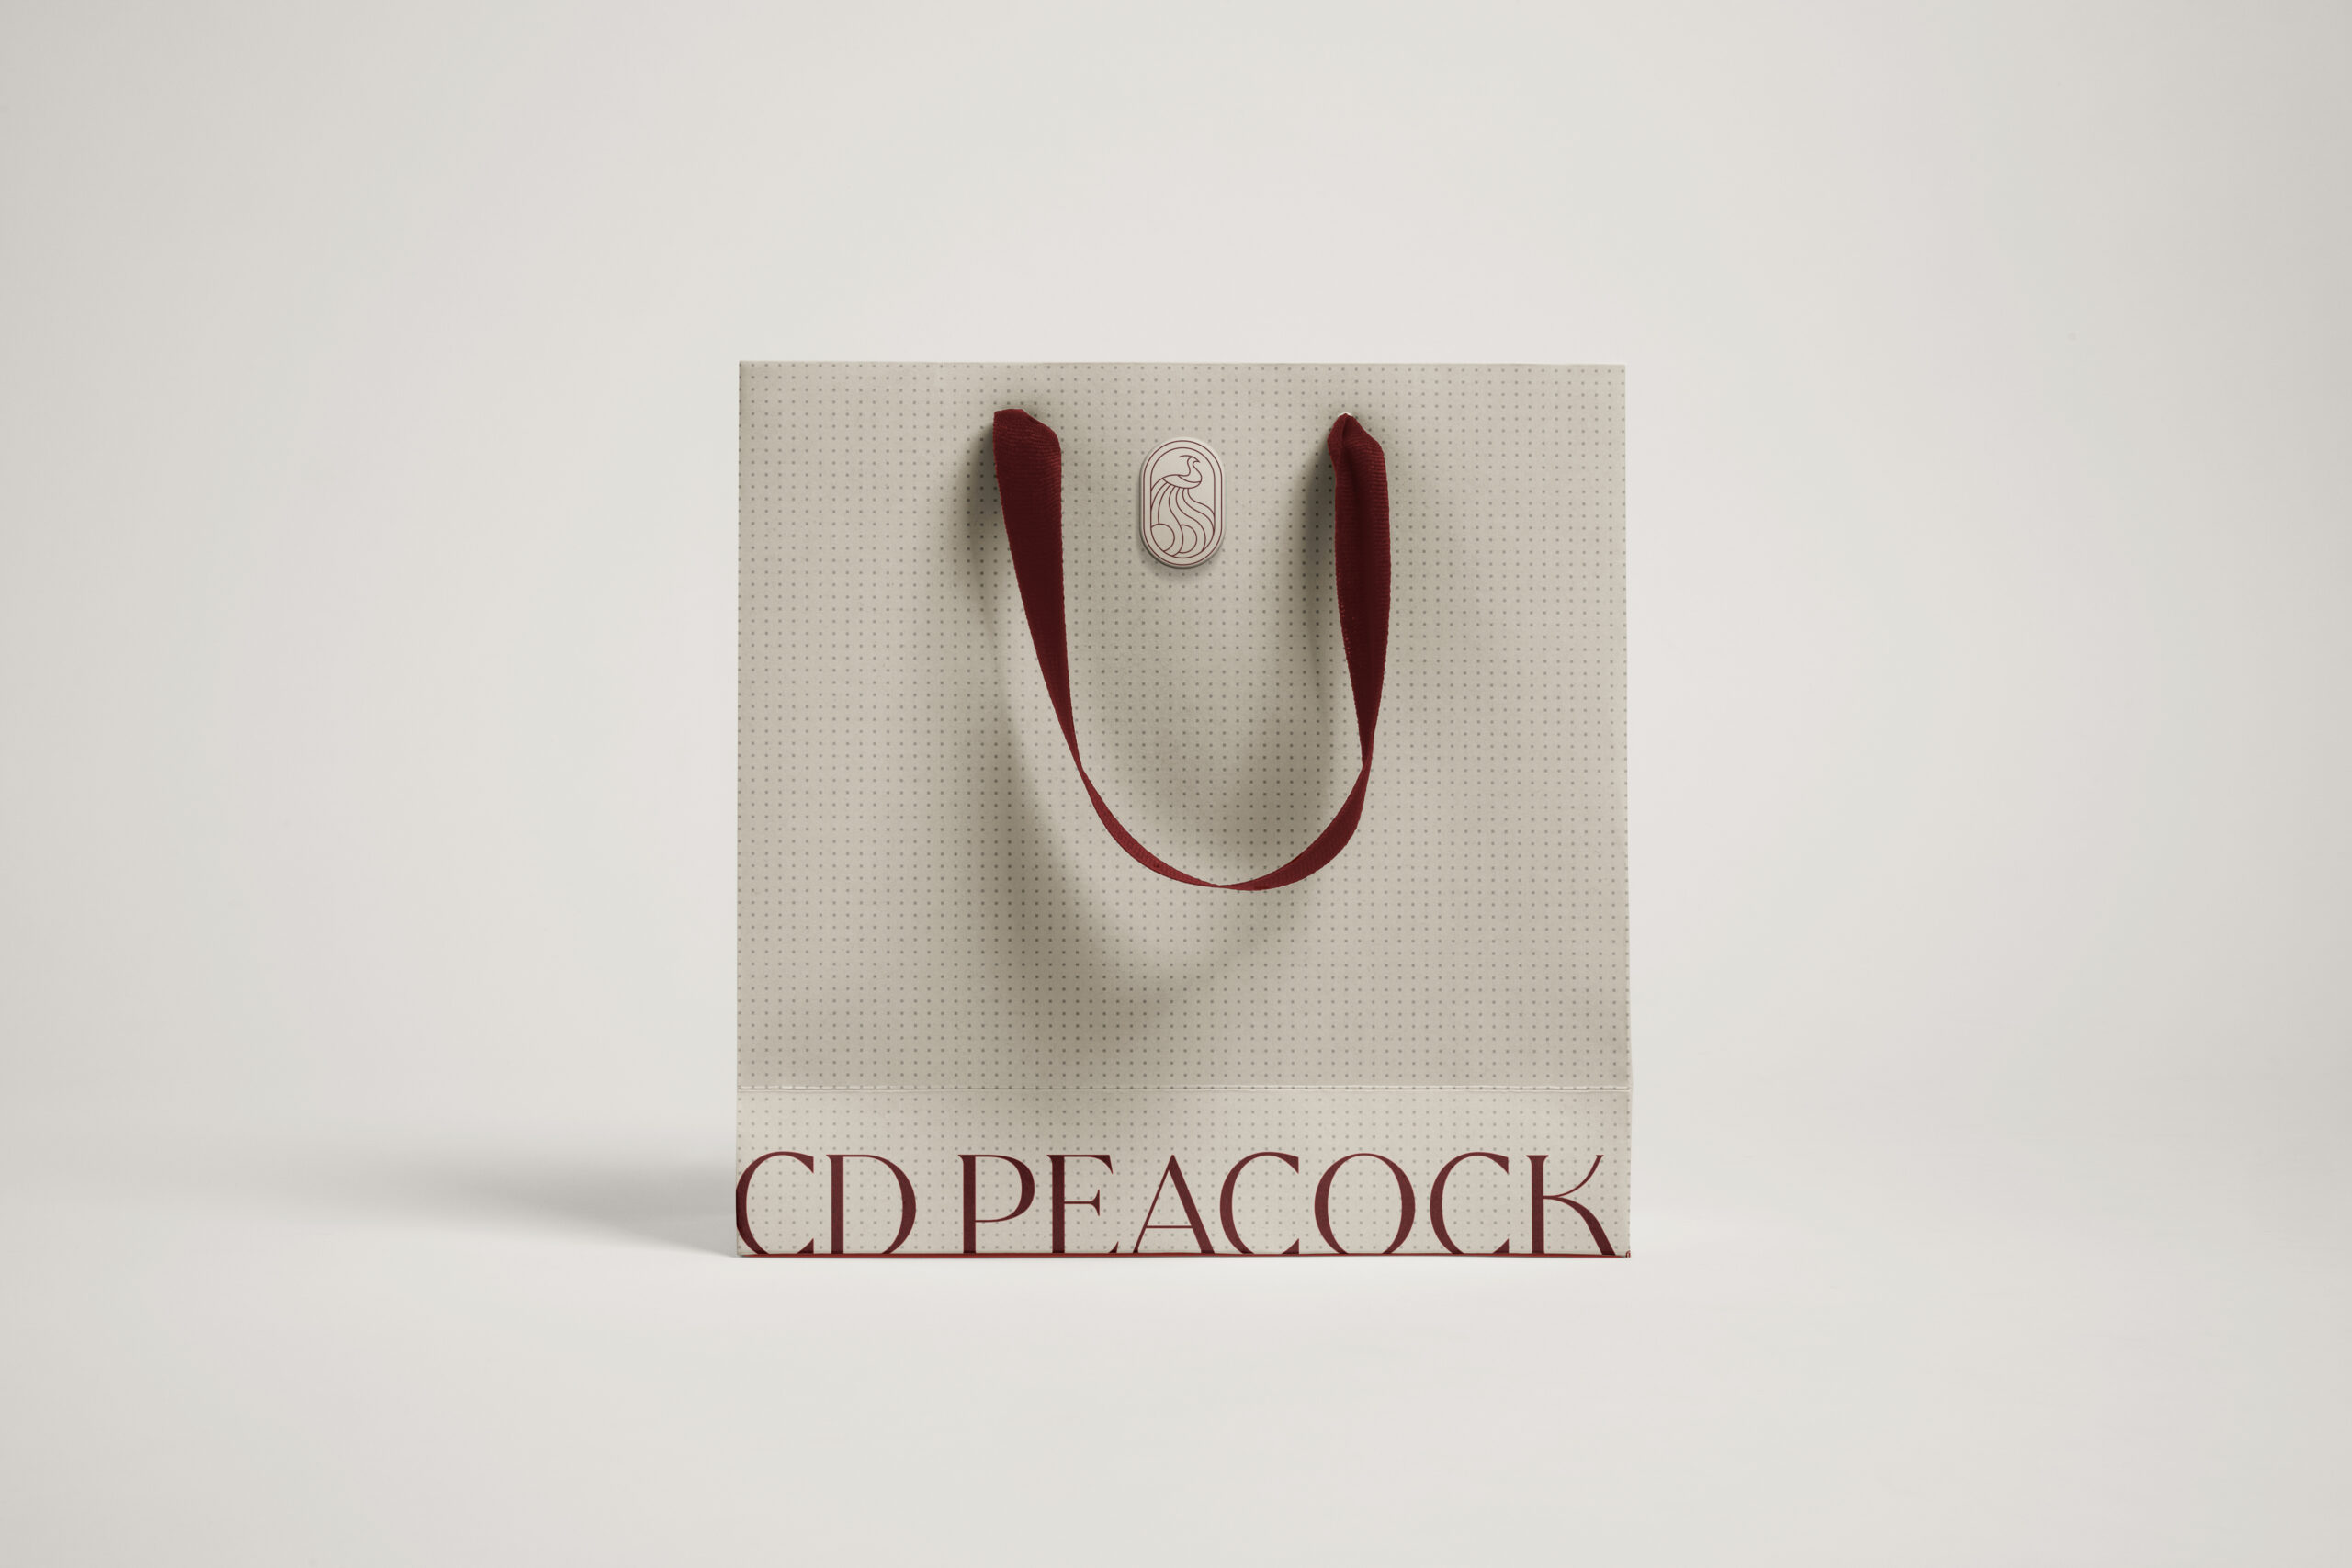 Fashion brand packaging design advertising and marketing agency